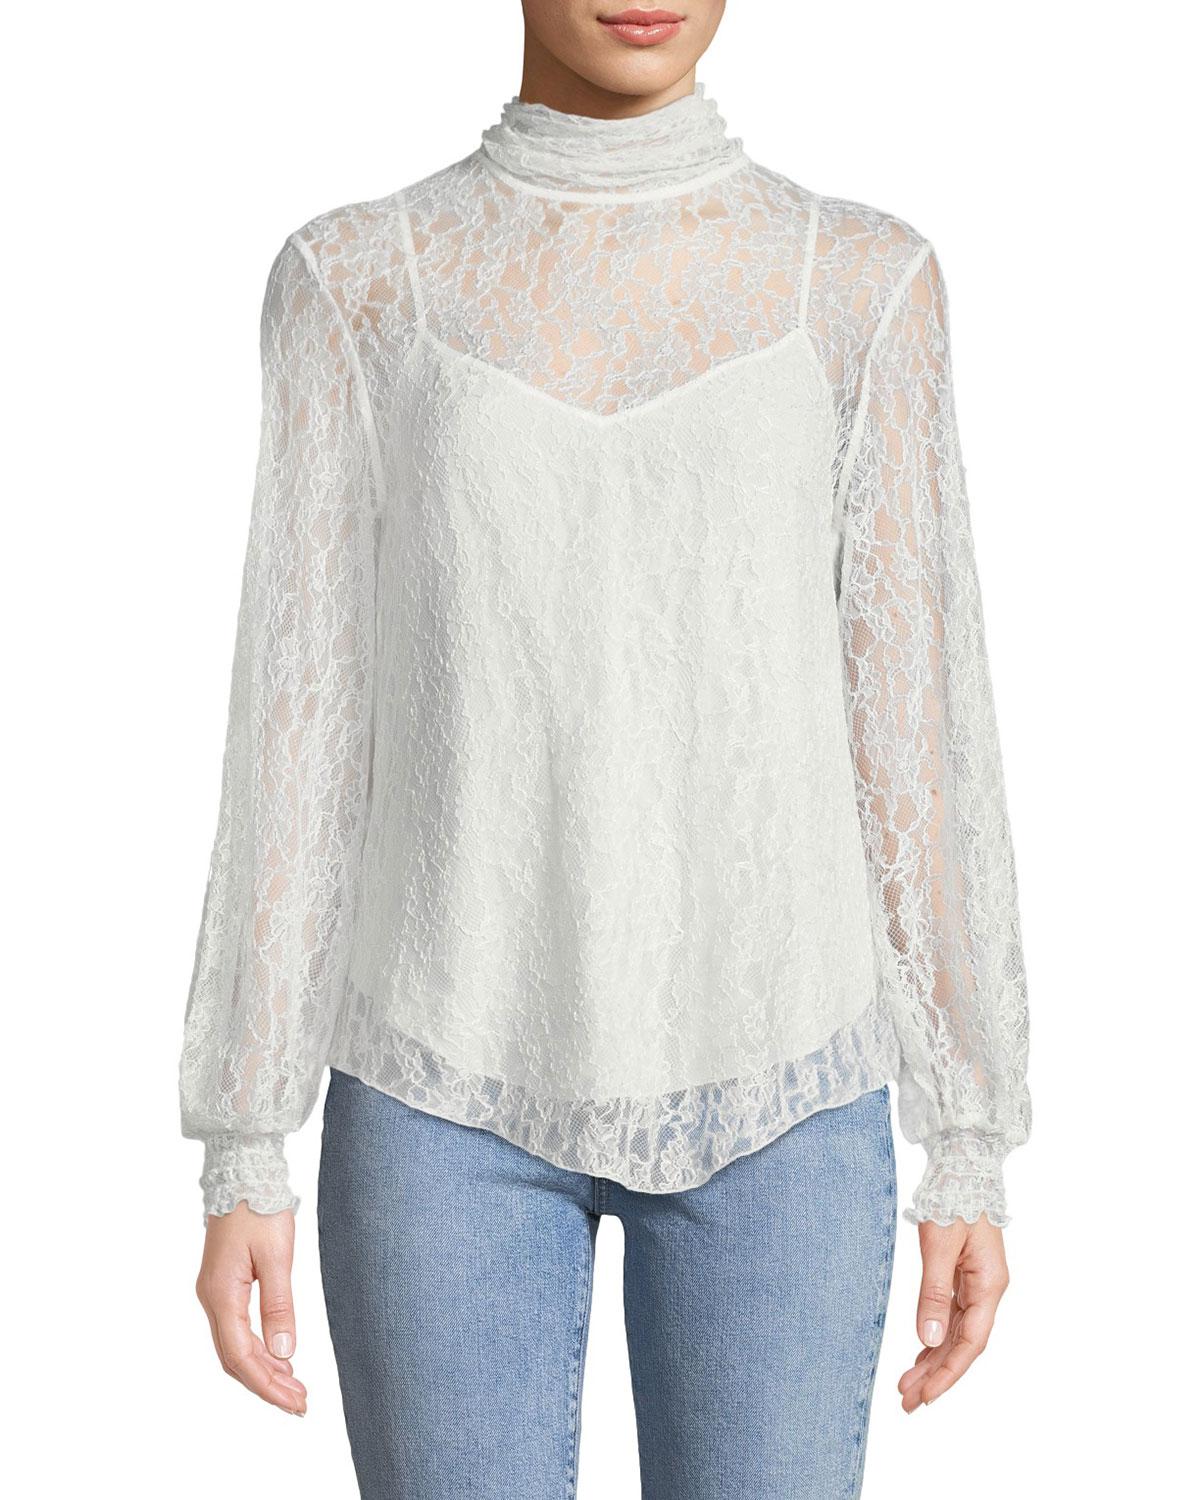 See By Chloé High-neck Lace Long-sleeve Blouse in Ivory (White) - Lyst